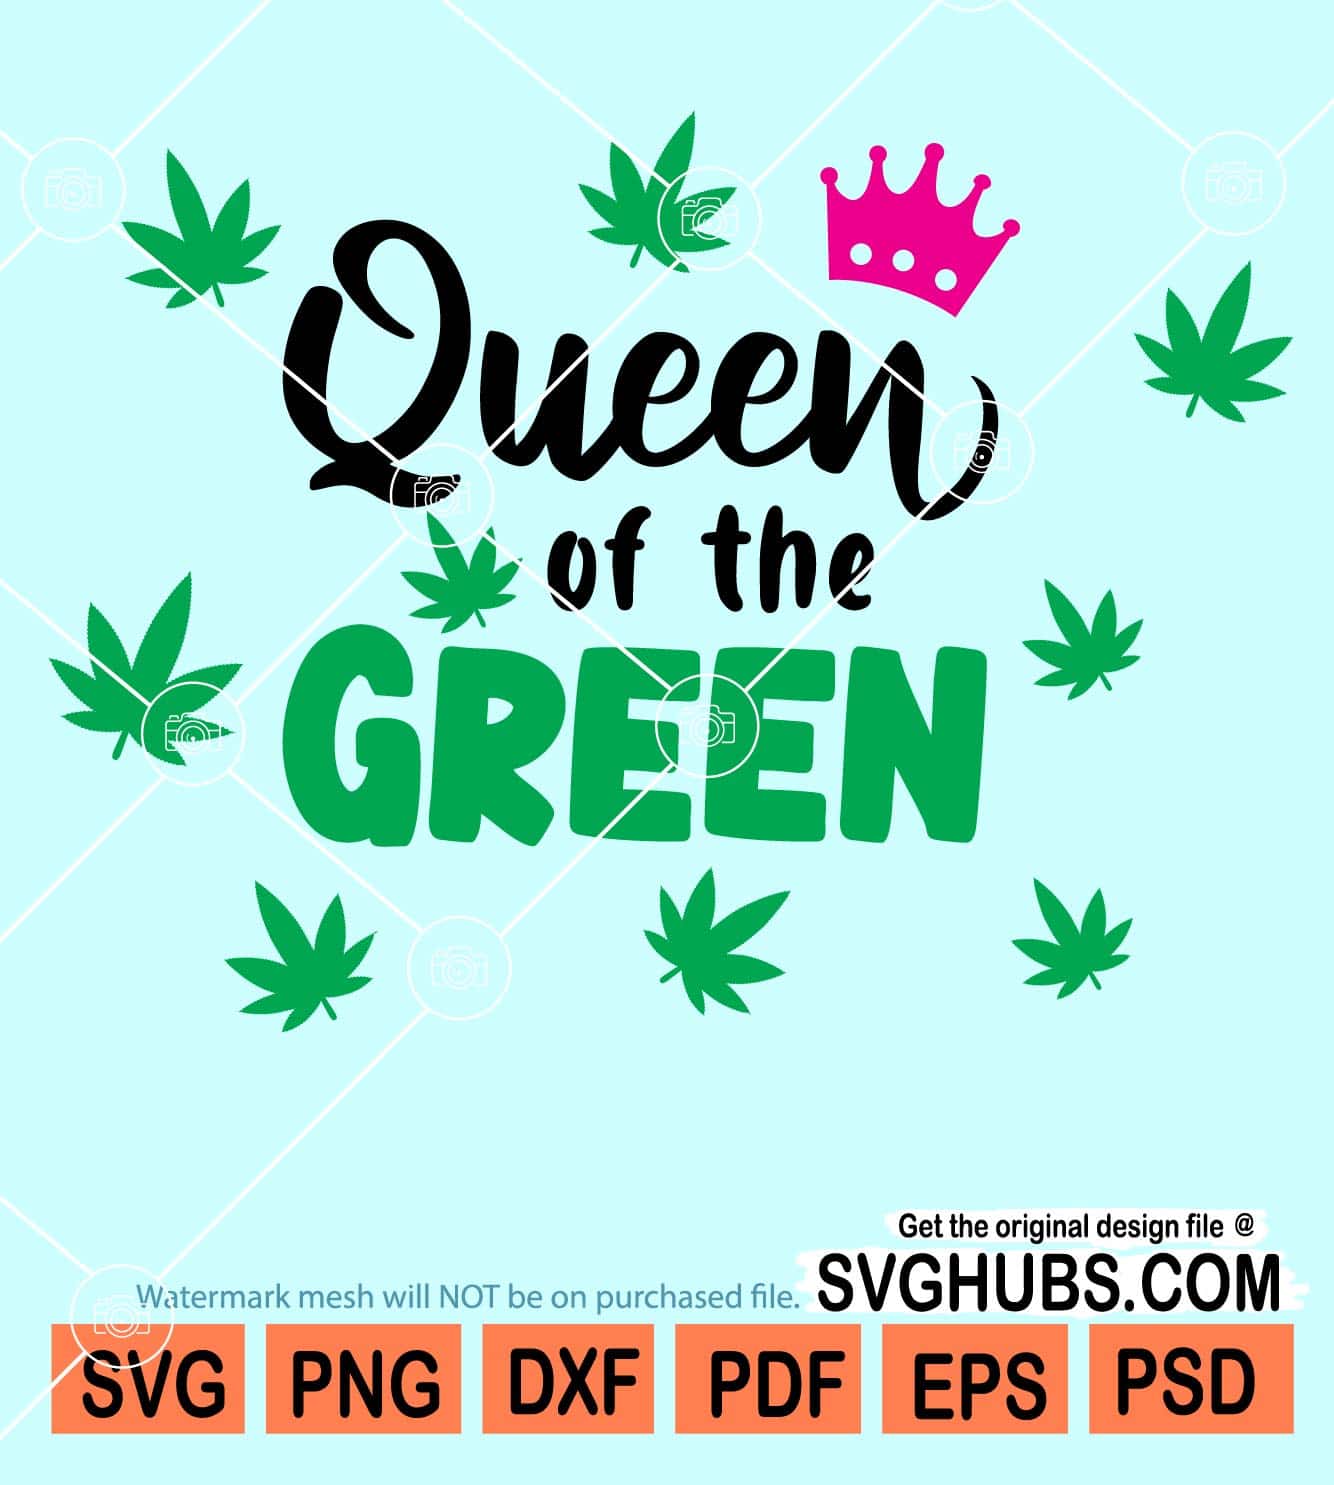 Queen of the green svg,Weed svg, funny weed quote svg, stoner svg, cannabis  svg,marijuana leaf svg, cannabis leaf svg